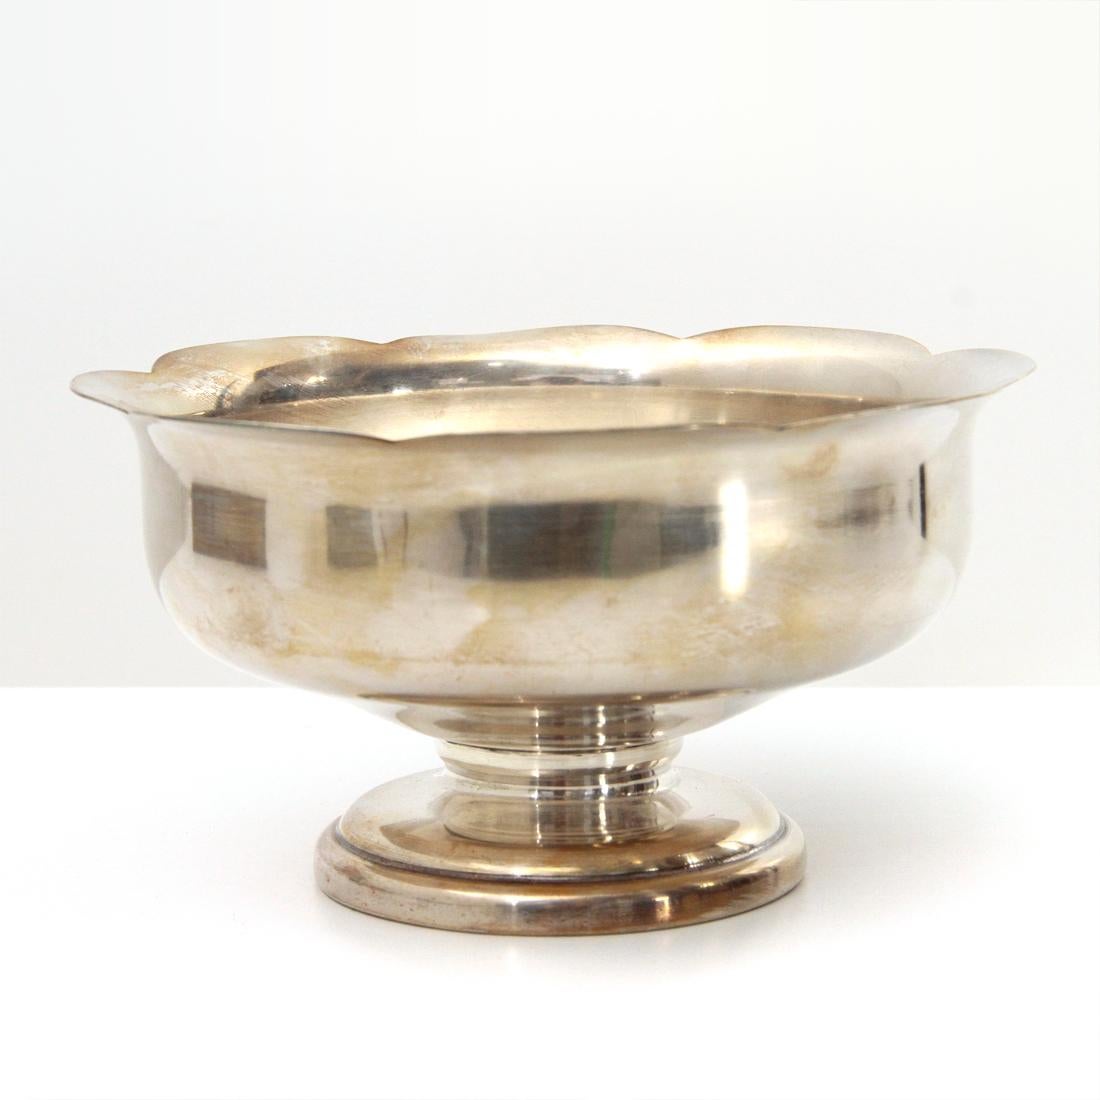 Centerpiece produced by Fratelli Calderoni in the 1950s.
Structure with petal-shaped edges in silver alpaca.
Good general conditions, some signs due to normal use over time.

Dimensions: Diameter 21 cm - Height 11.5 cm